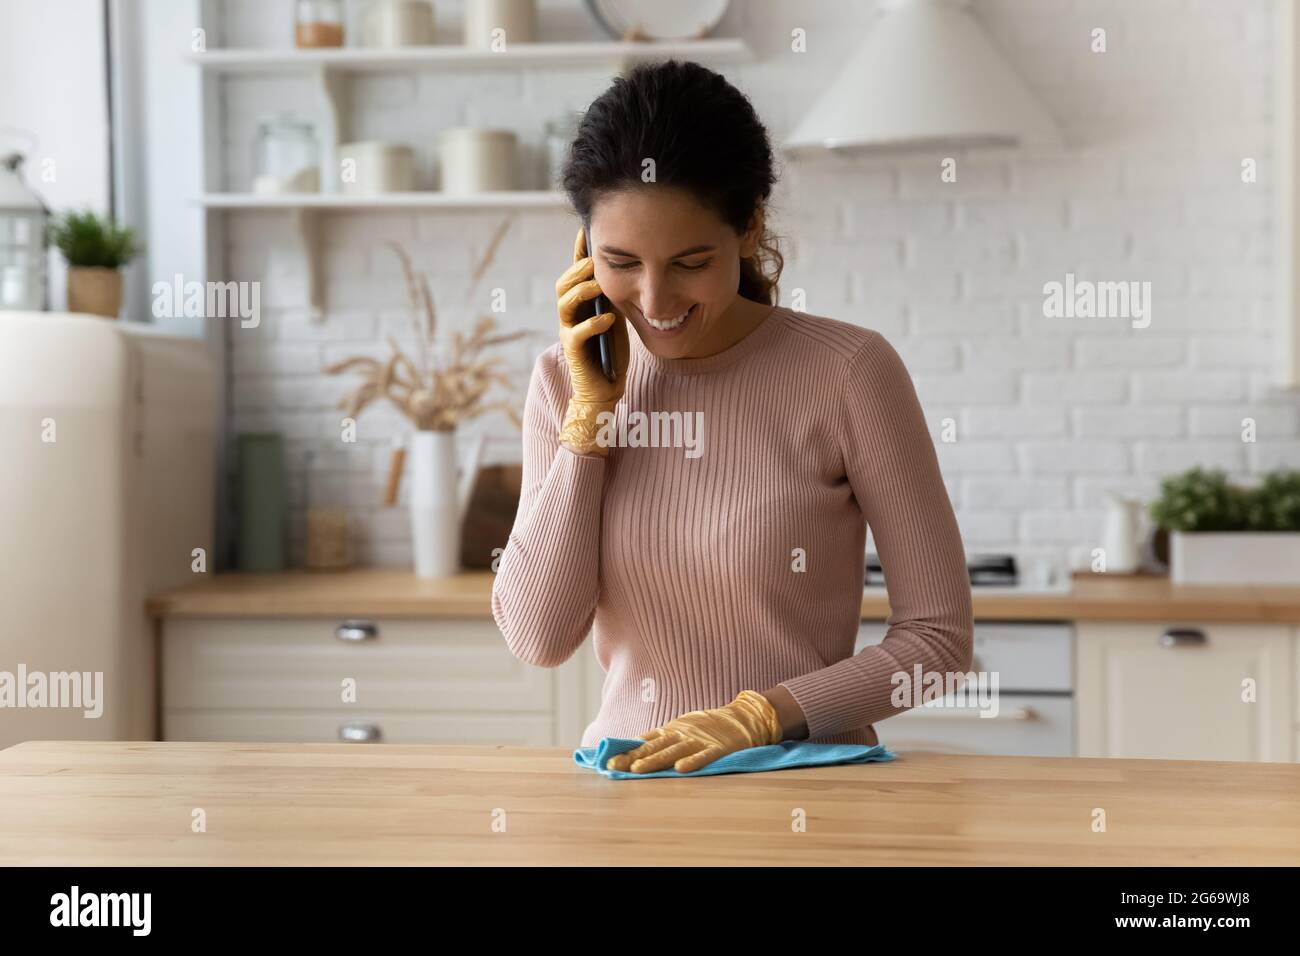 Happy young housewife chatting on cellphone while cleaning kitchen. Stock Photo